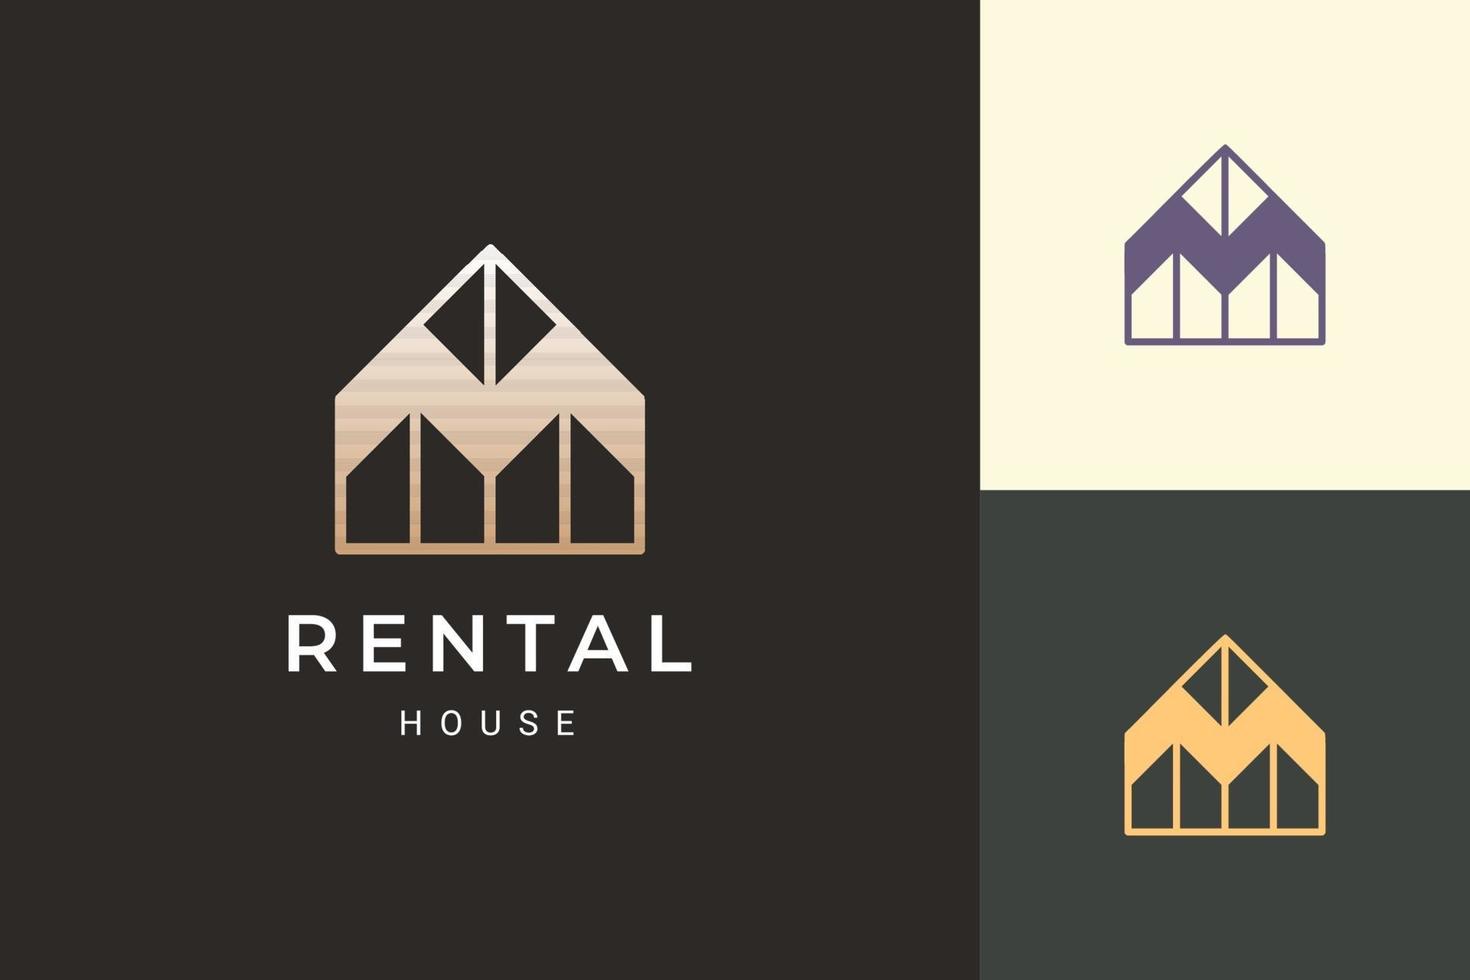 Home or resort logo in luxury style for real estate business vector